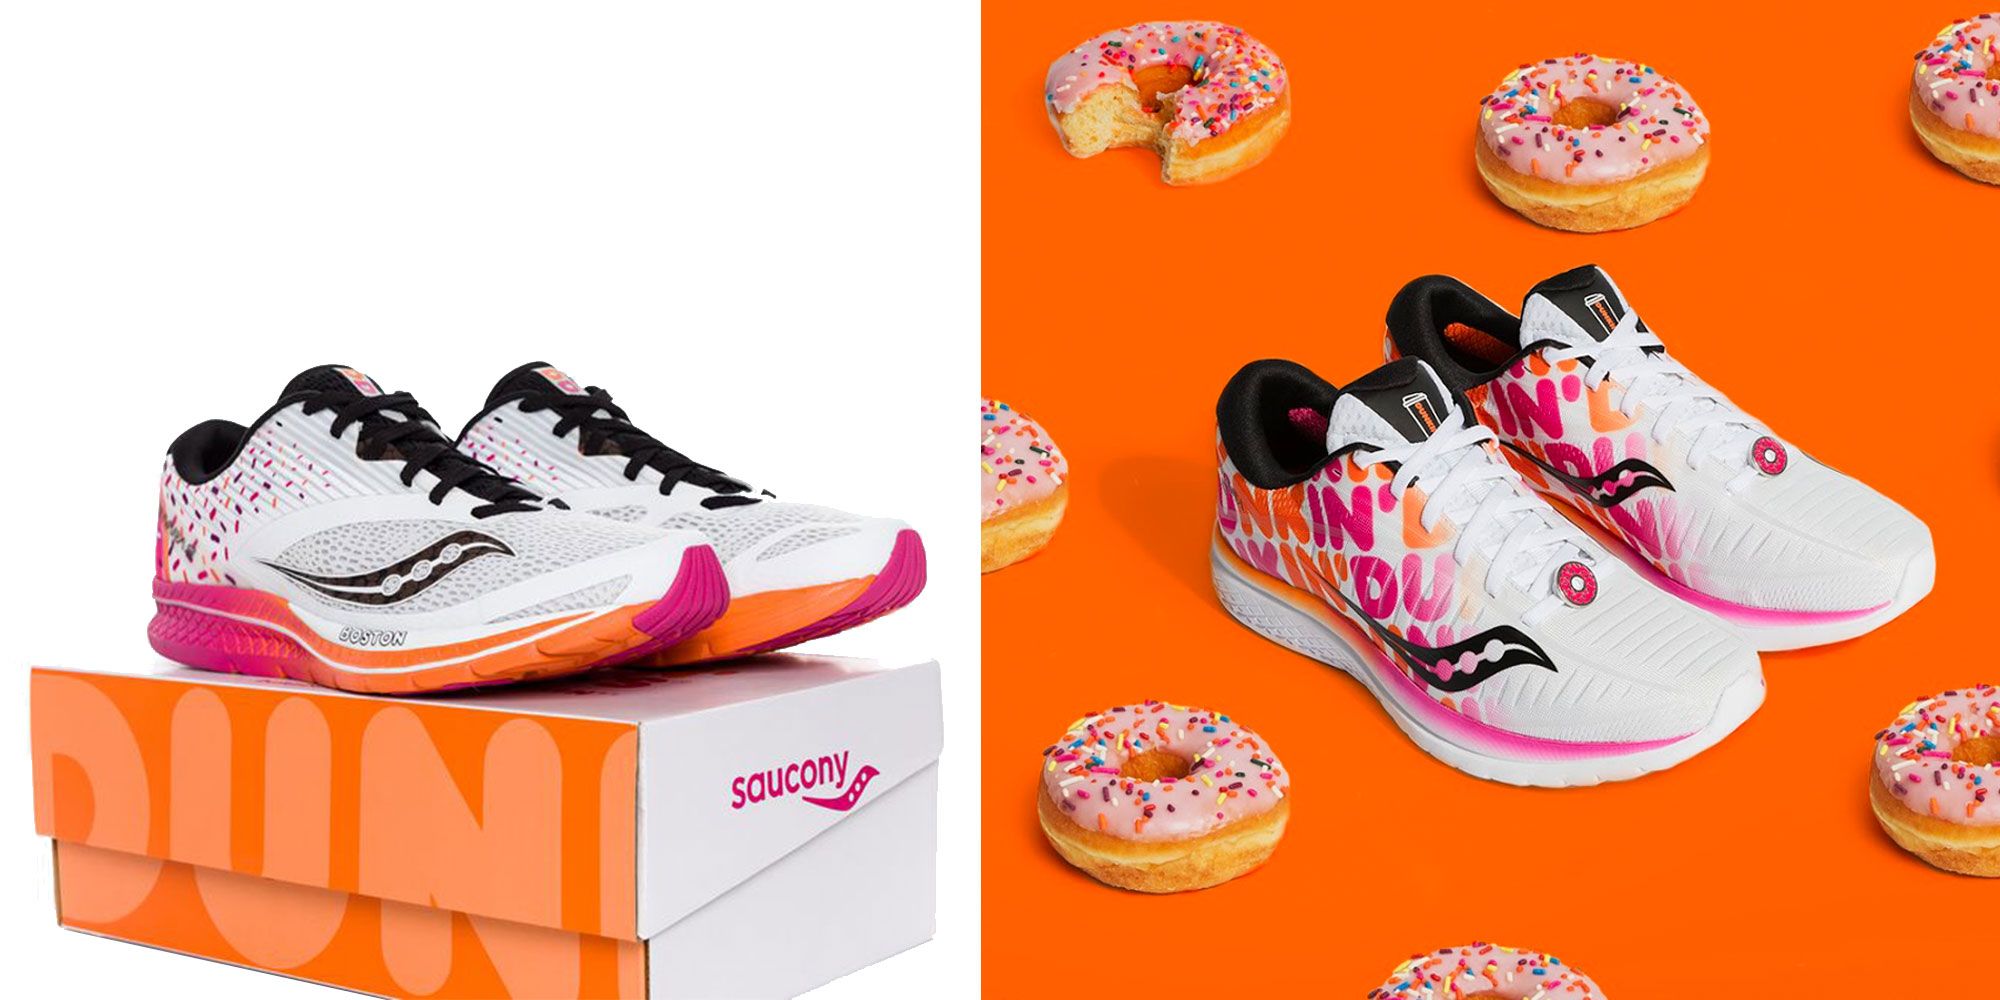 new dunkin donuts shoes